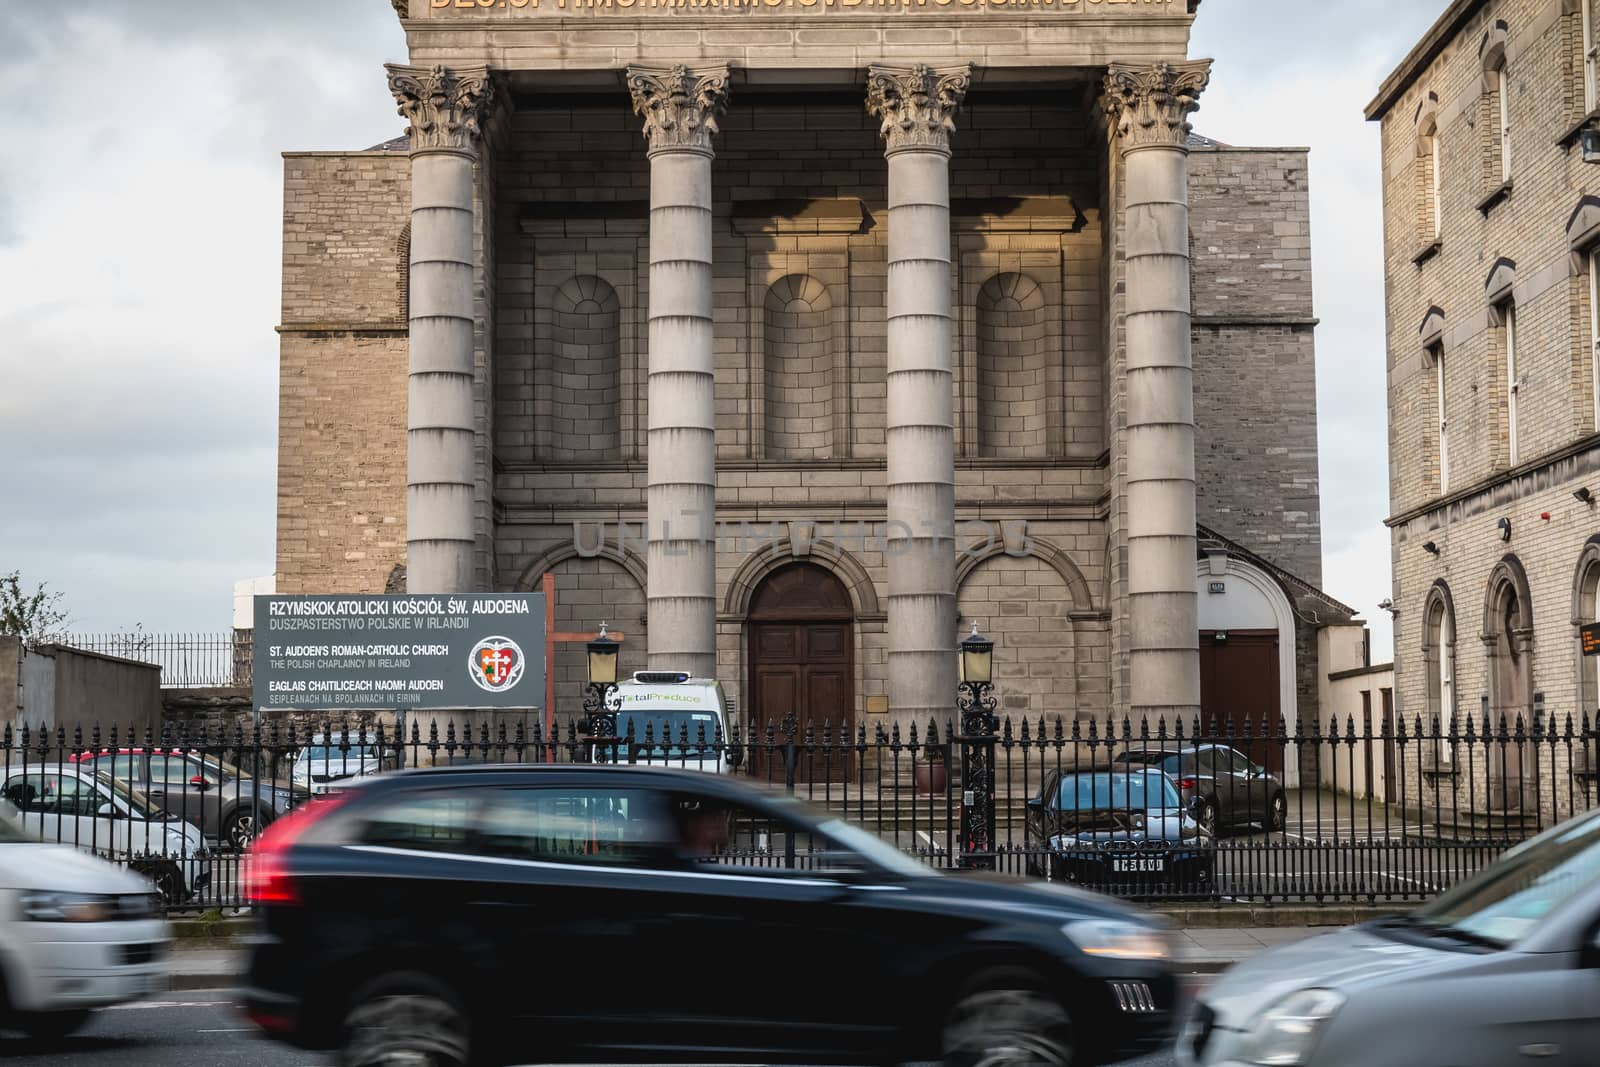 Dublin, Ireland - February 13, 2019: Street atmosphere and architecture of St. Audoen's Roman Catholic Church that people visit on a winter day